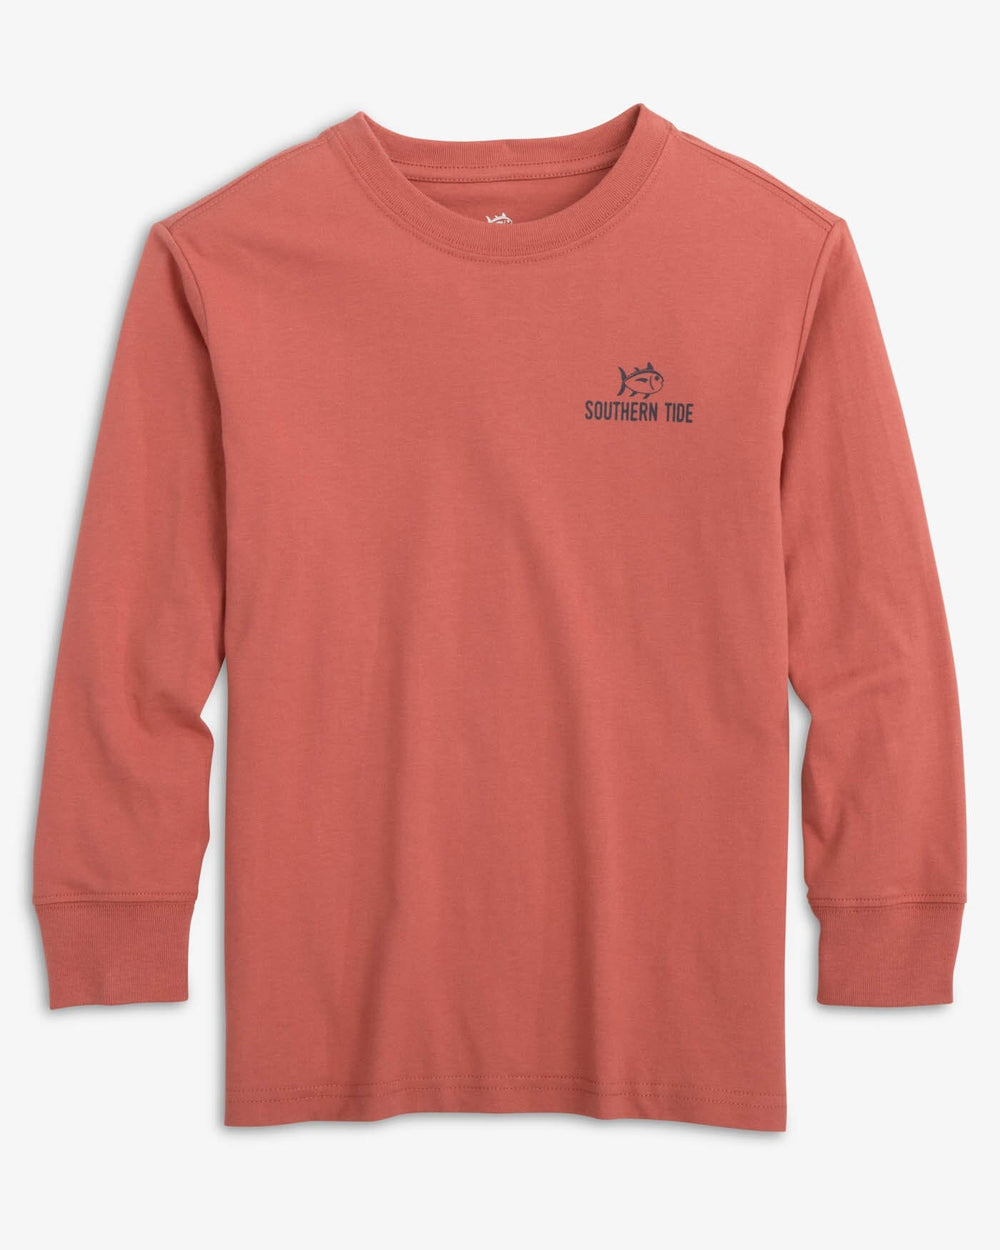 The front view of the Southern Tide Kids Gradient Tent Long Sleeve T-Shirt by Southern Tide - Dusty Coral